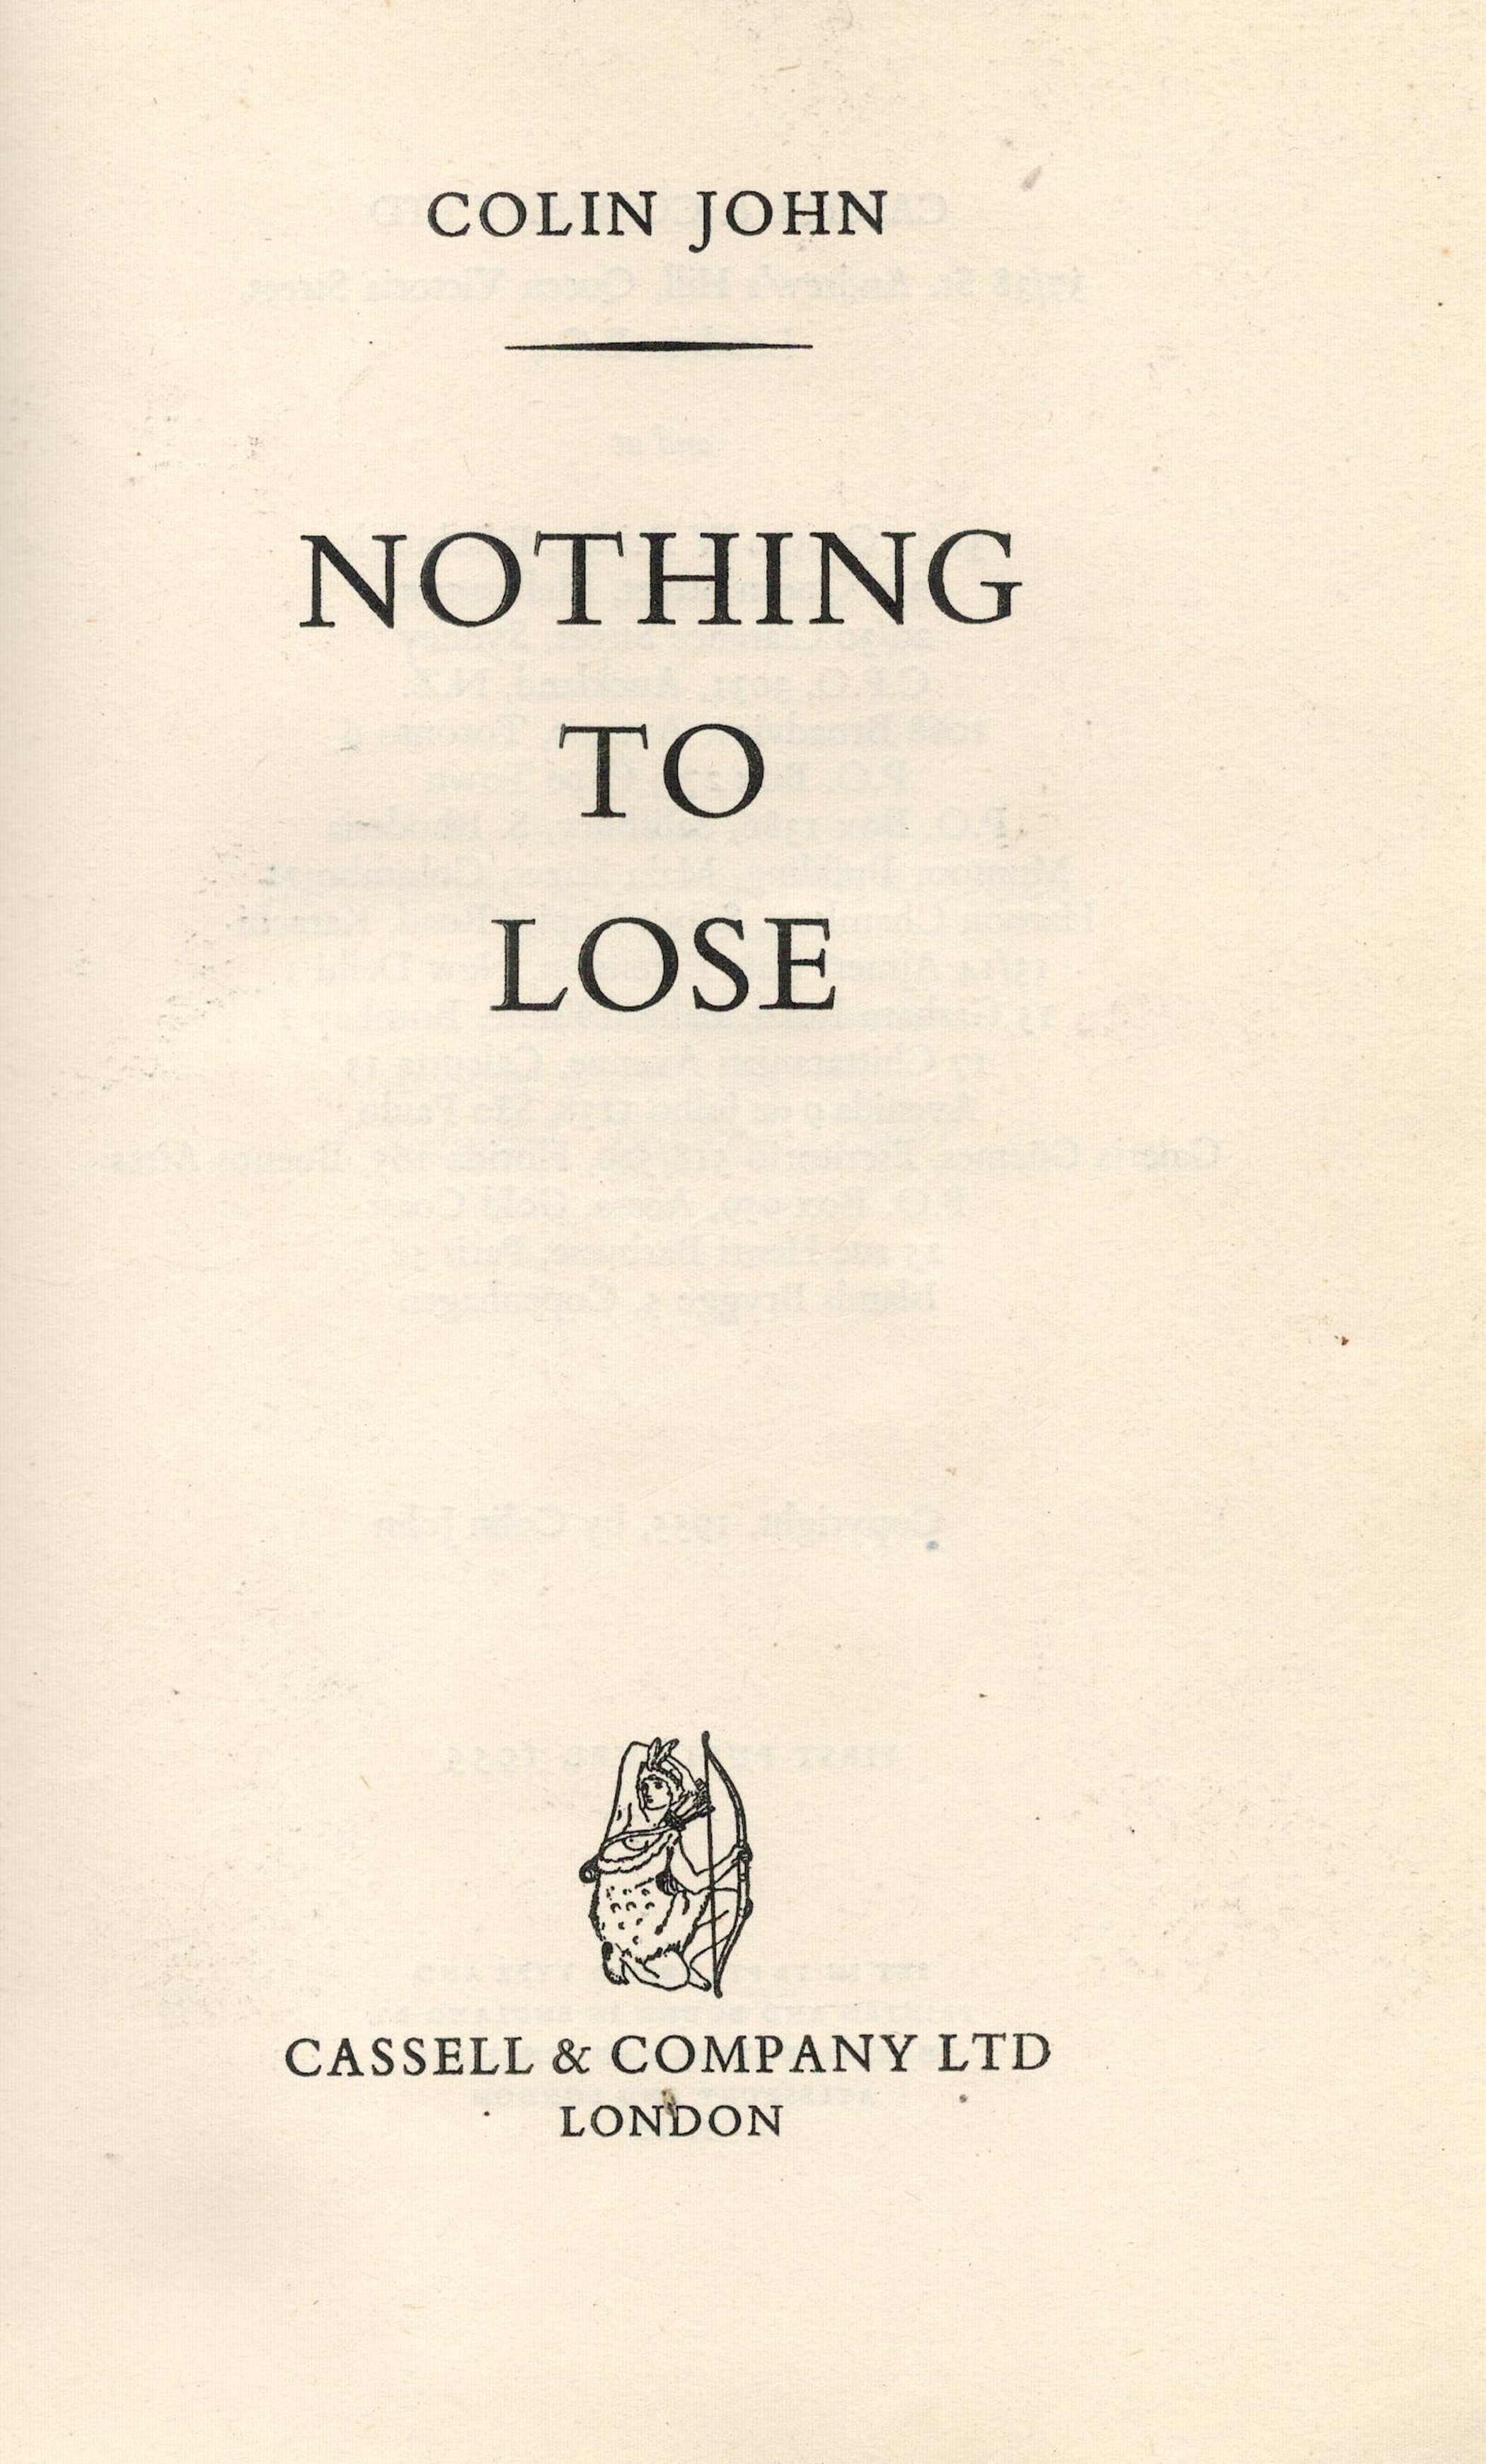 Nothing to Lose by Colin John First Edition 1955 Hardback Book published by Cassell and Co Ltd - Image 3 of 4